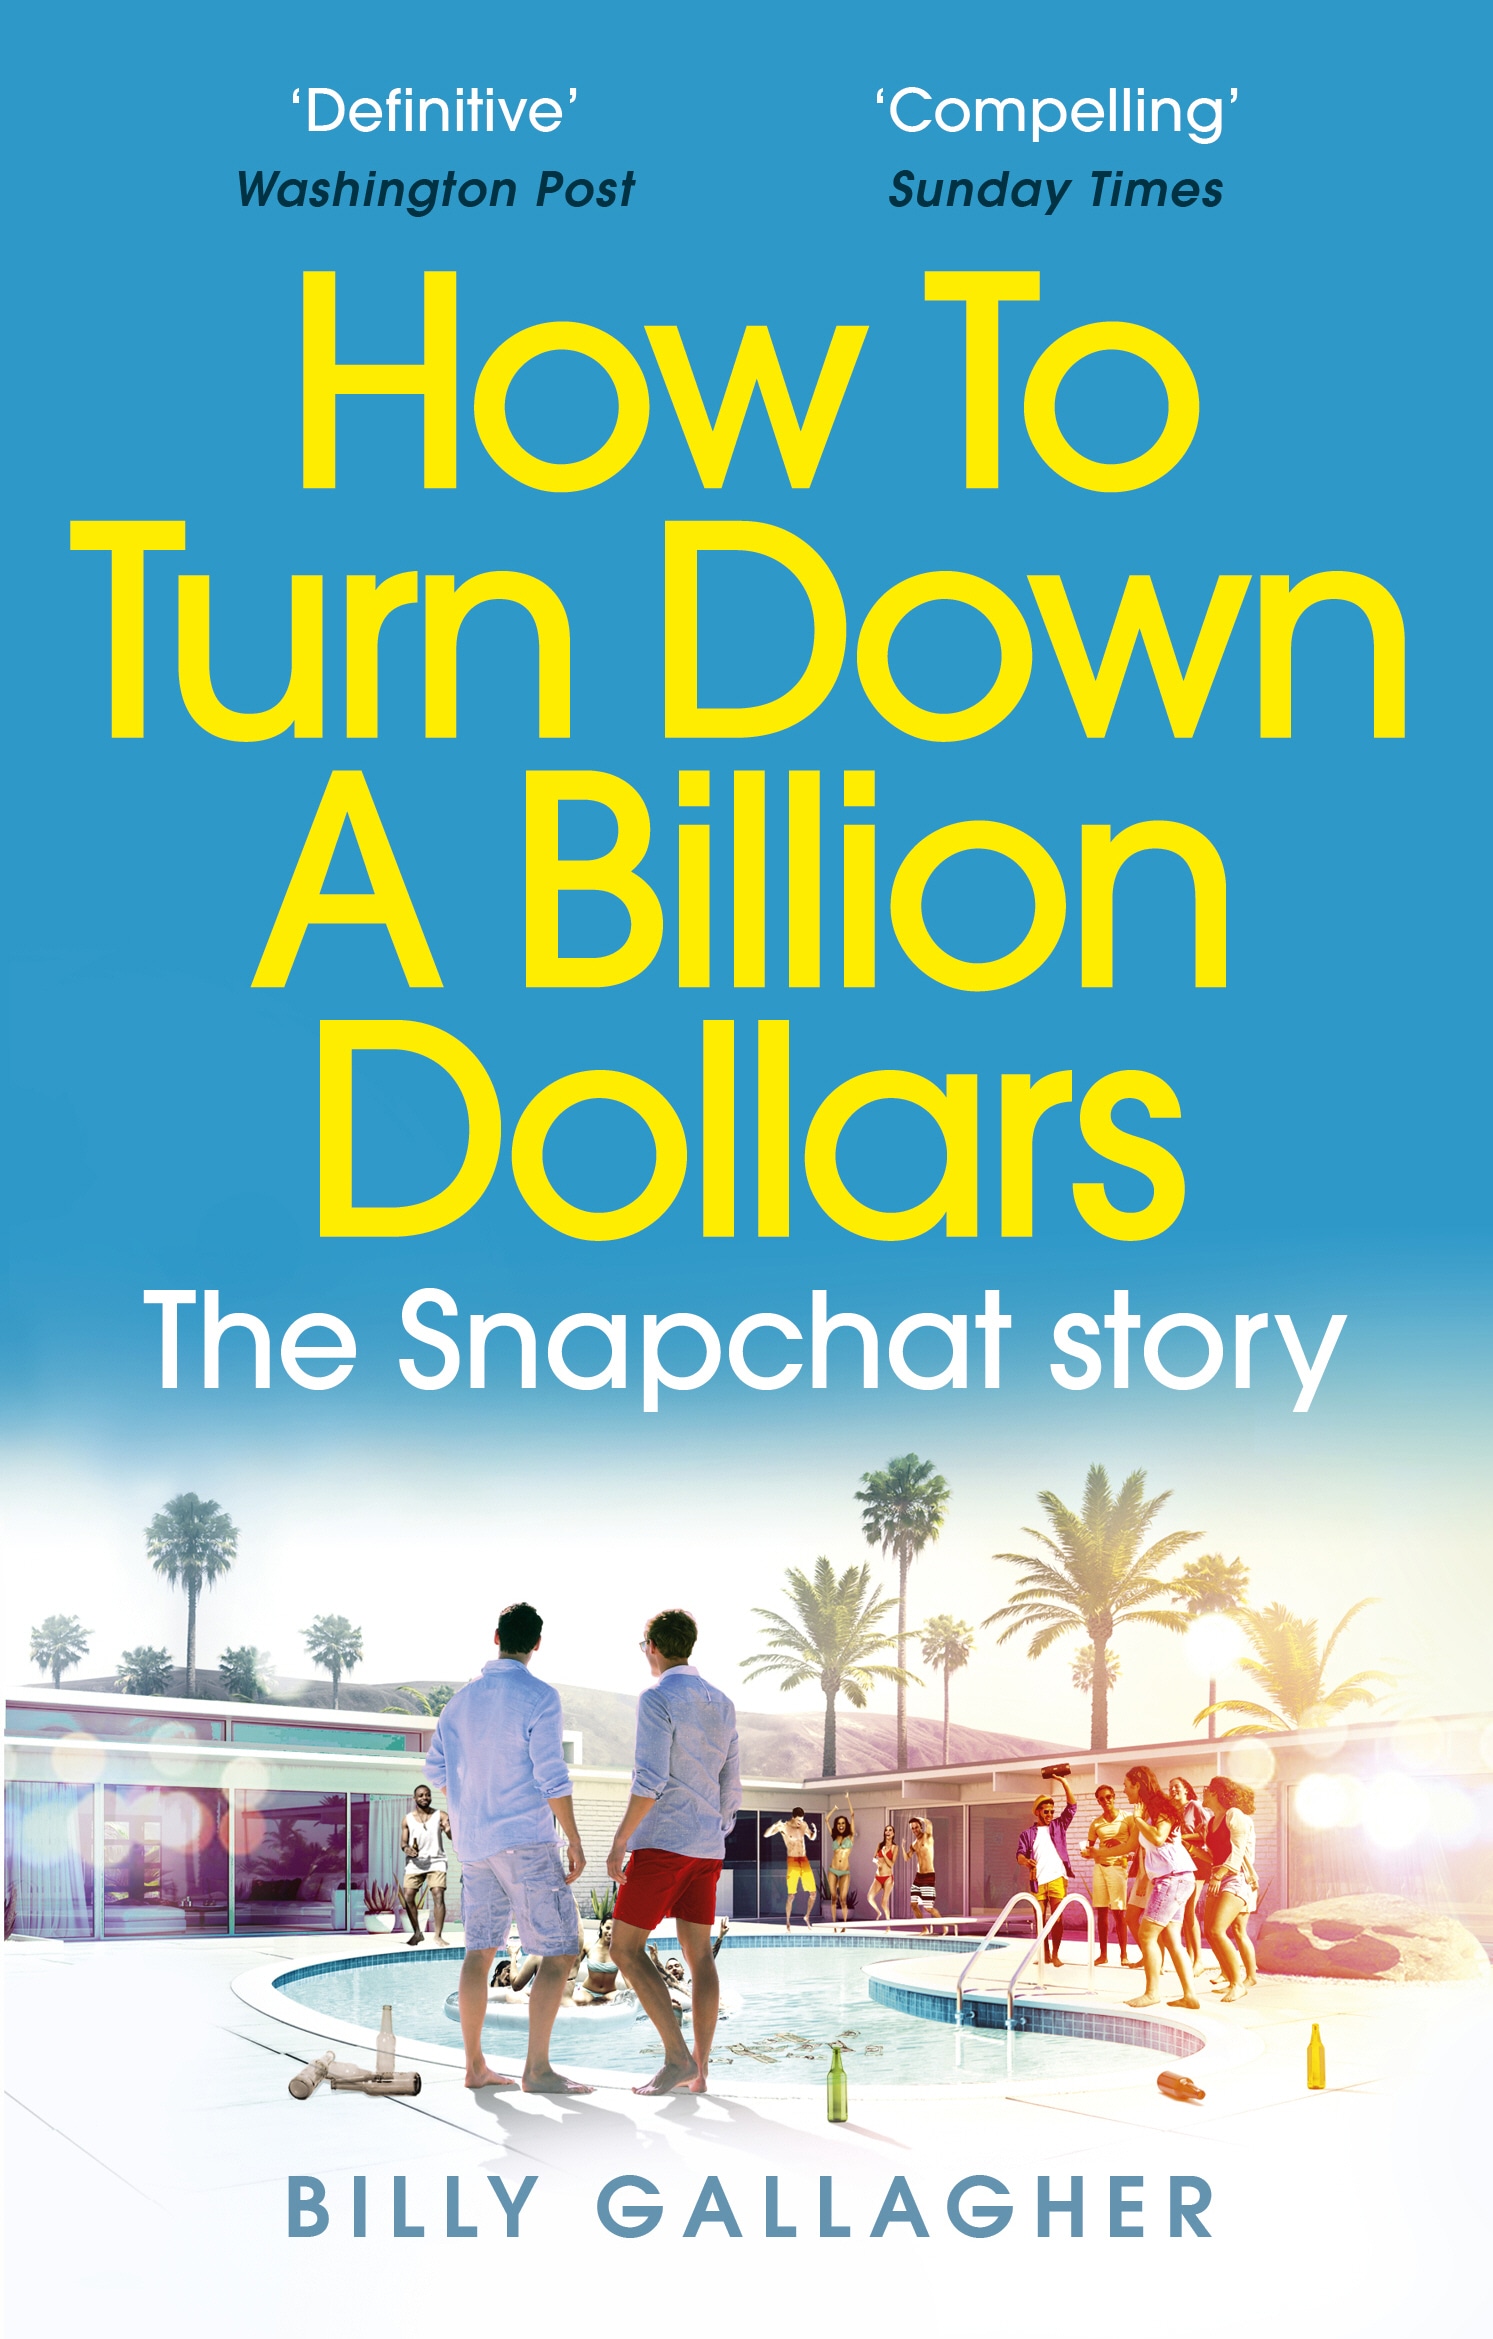 Book “How to Turn Down a Billion Dollars” by Billy Gallagher — January 24, 2019